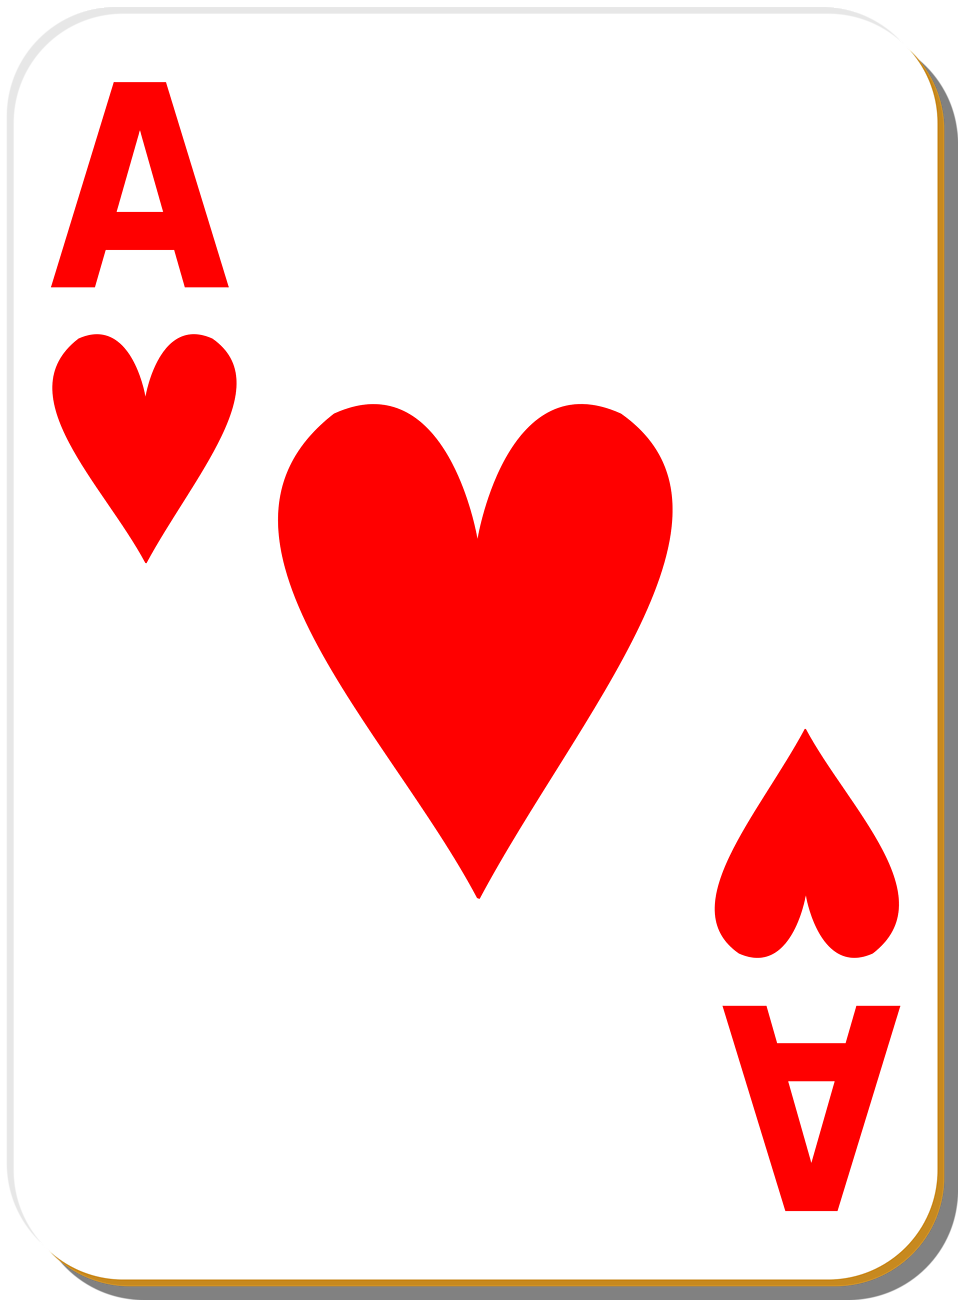 play cards clipart - photo #20